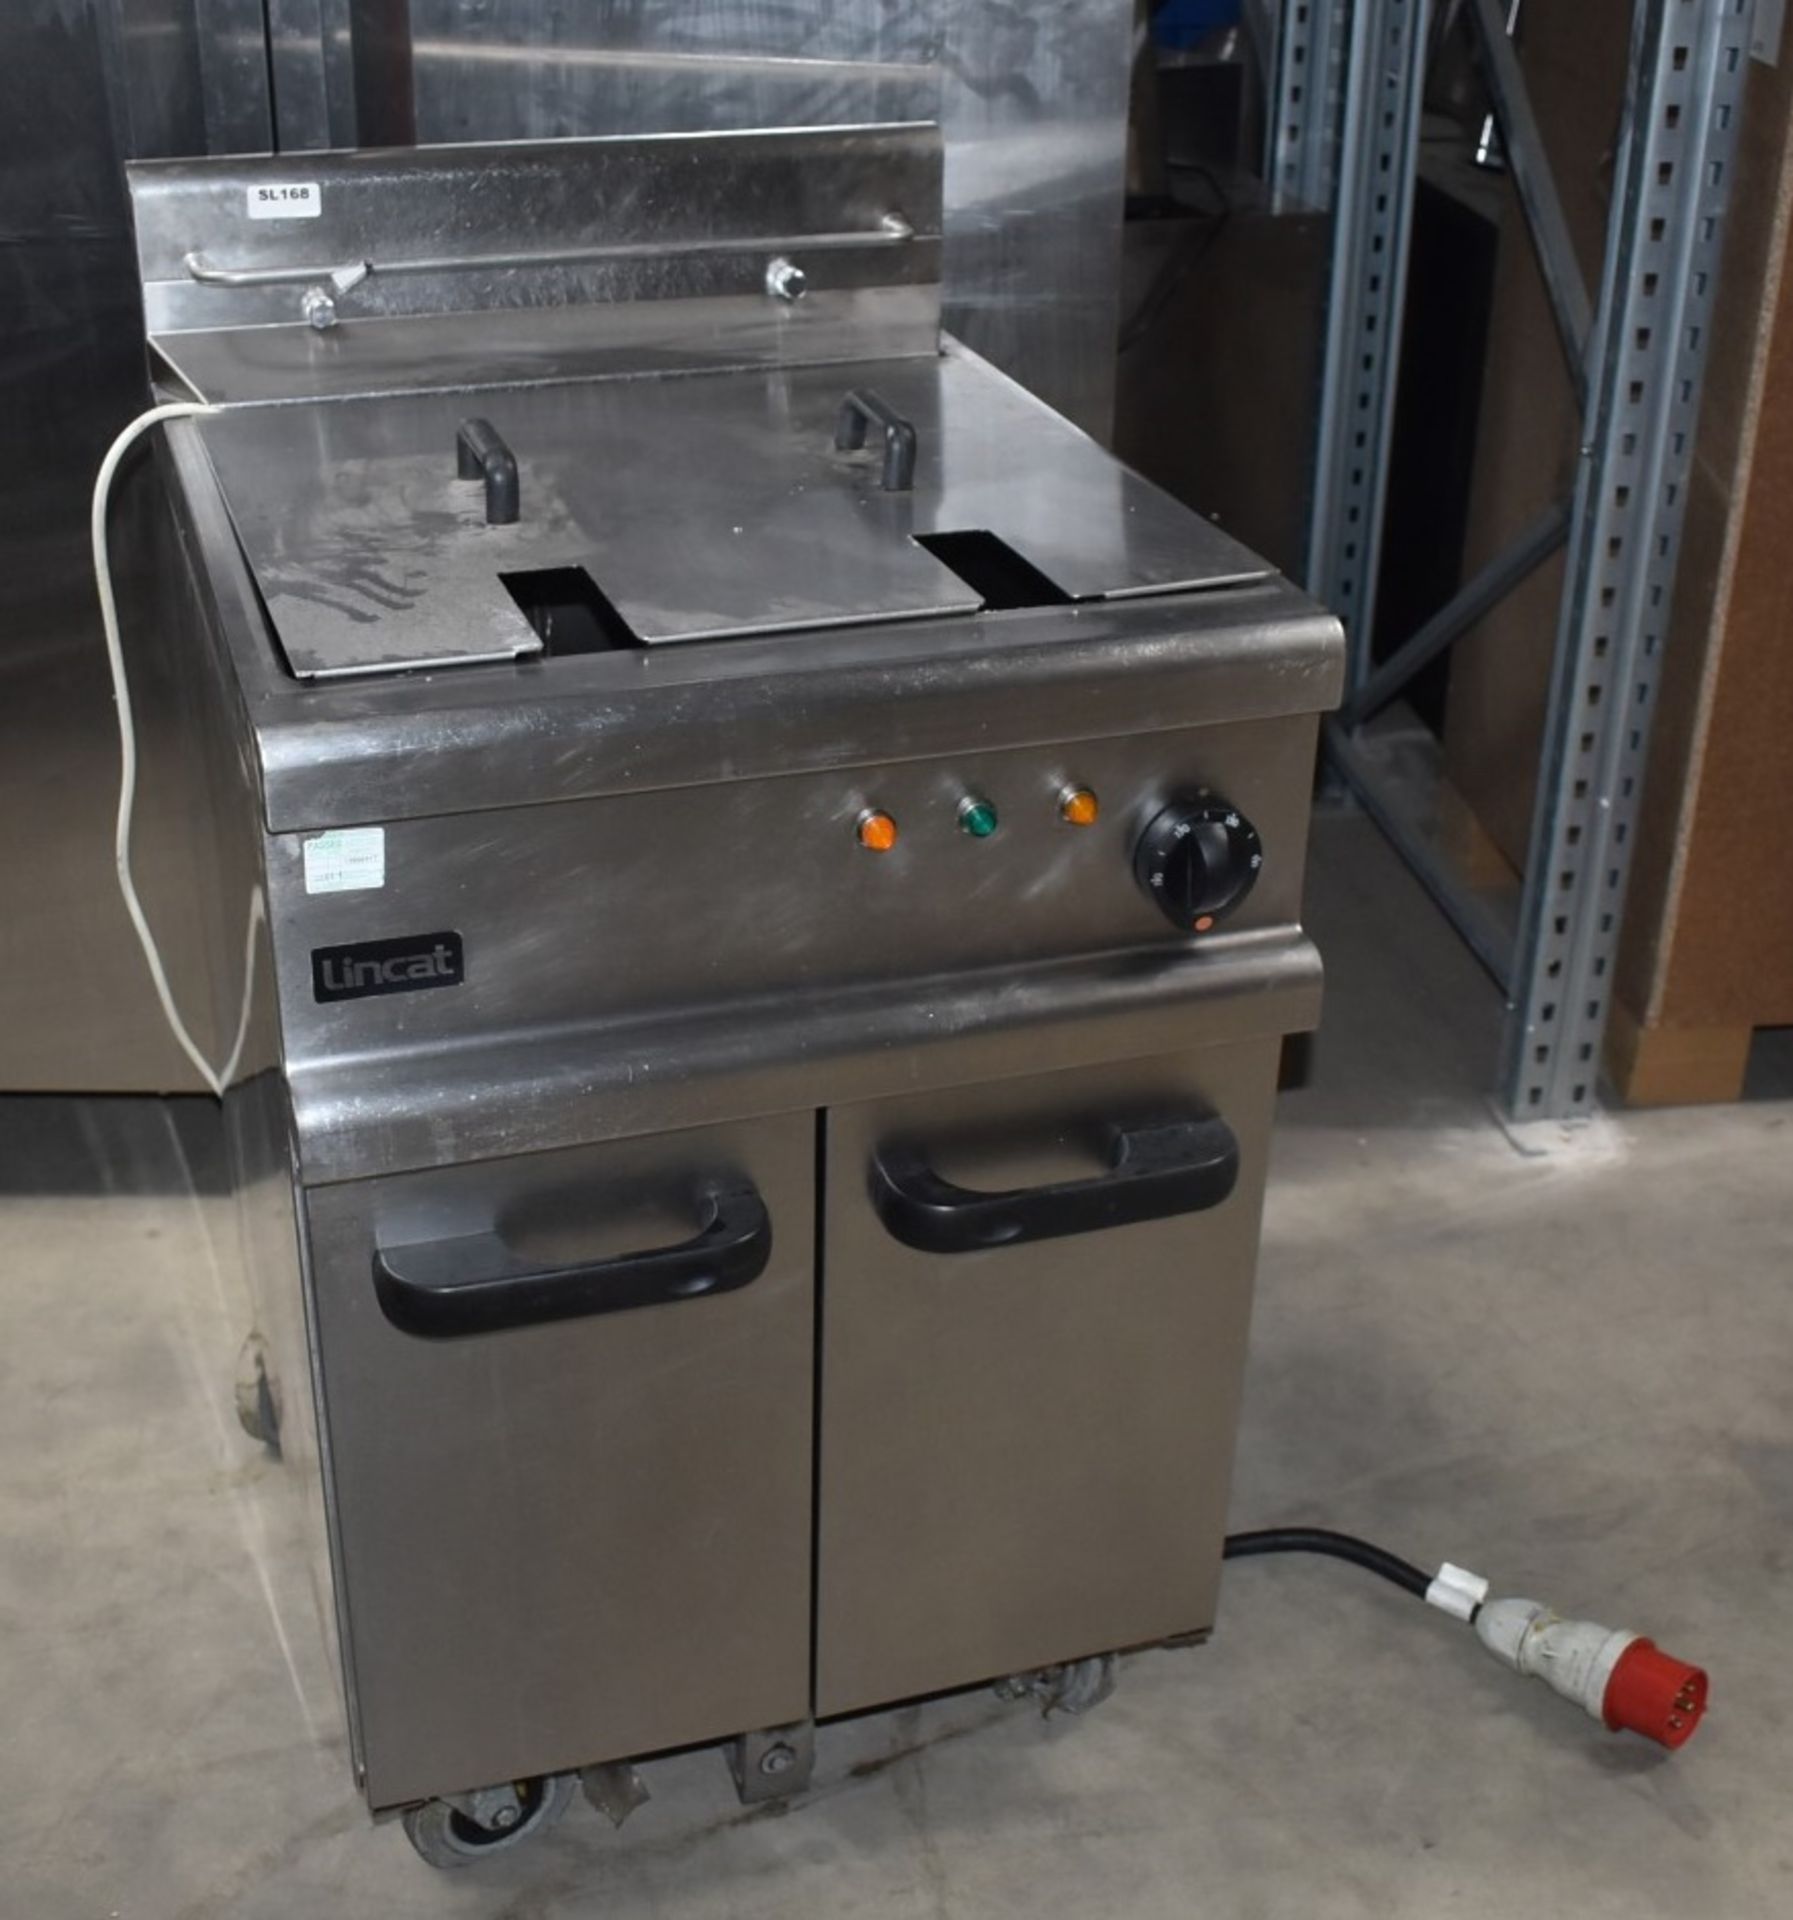 1 x Lincat Opus 700 Single Tank Electric Fryer With Built In Filtration - 3 Phase - Image 2 of 15